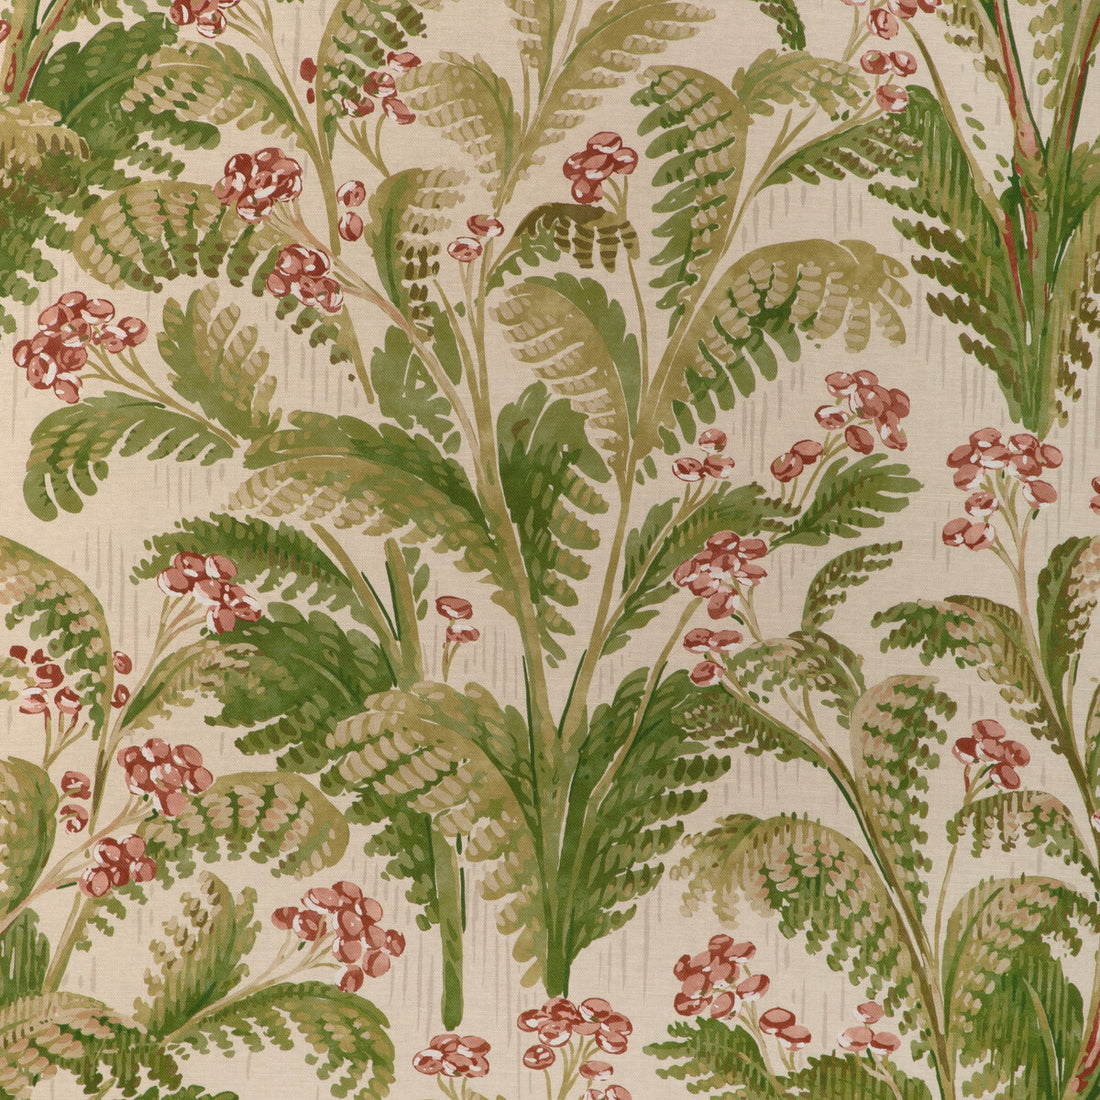 Pashley Print fabric in berry color - pattern 2023140.319.0 - by Lee Jofa in the Garden Walk collection